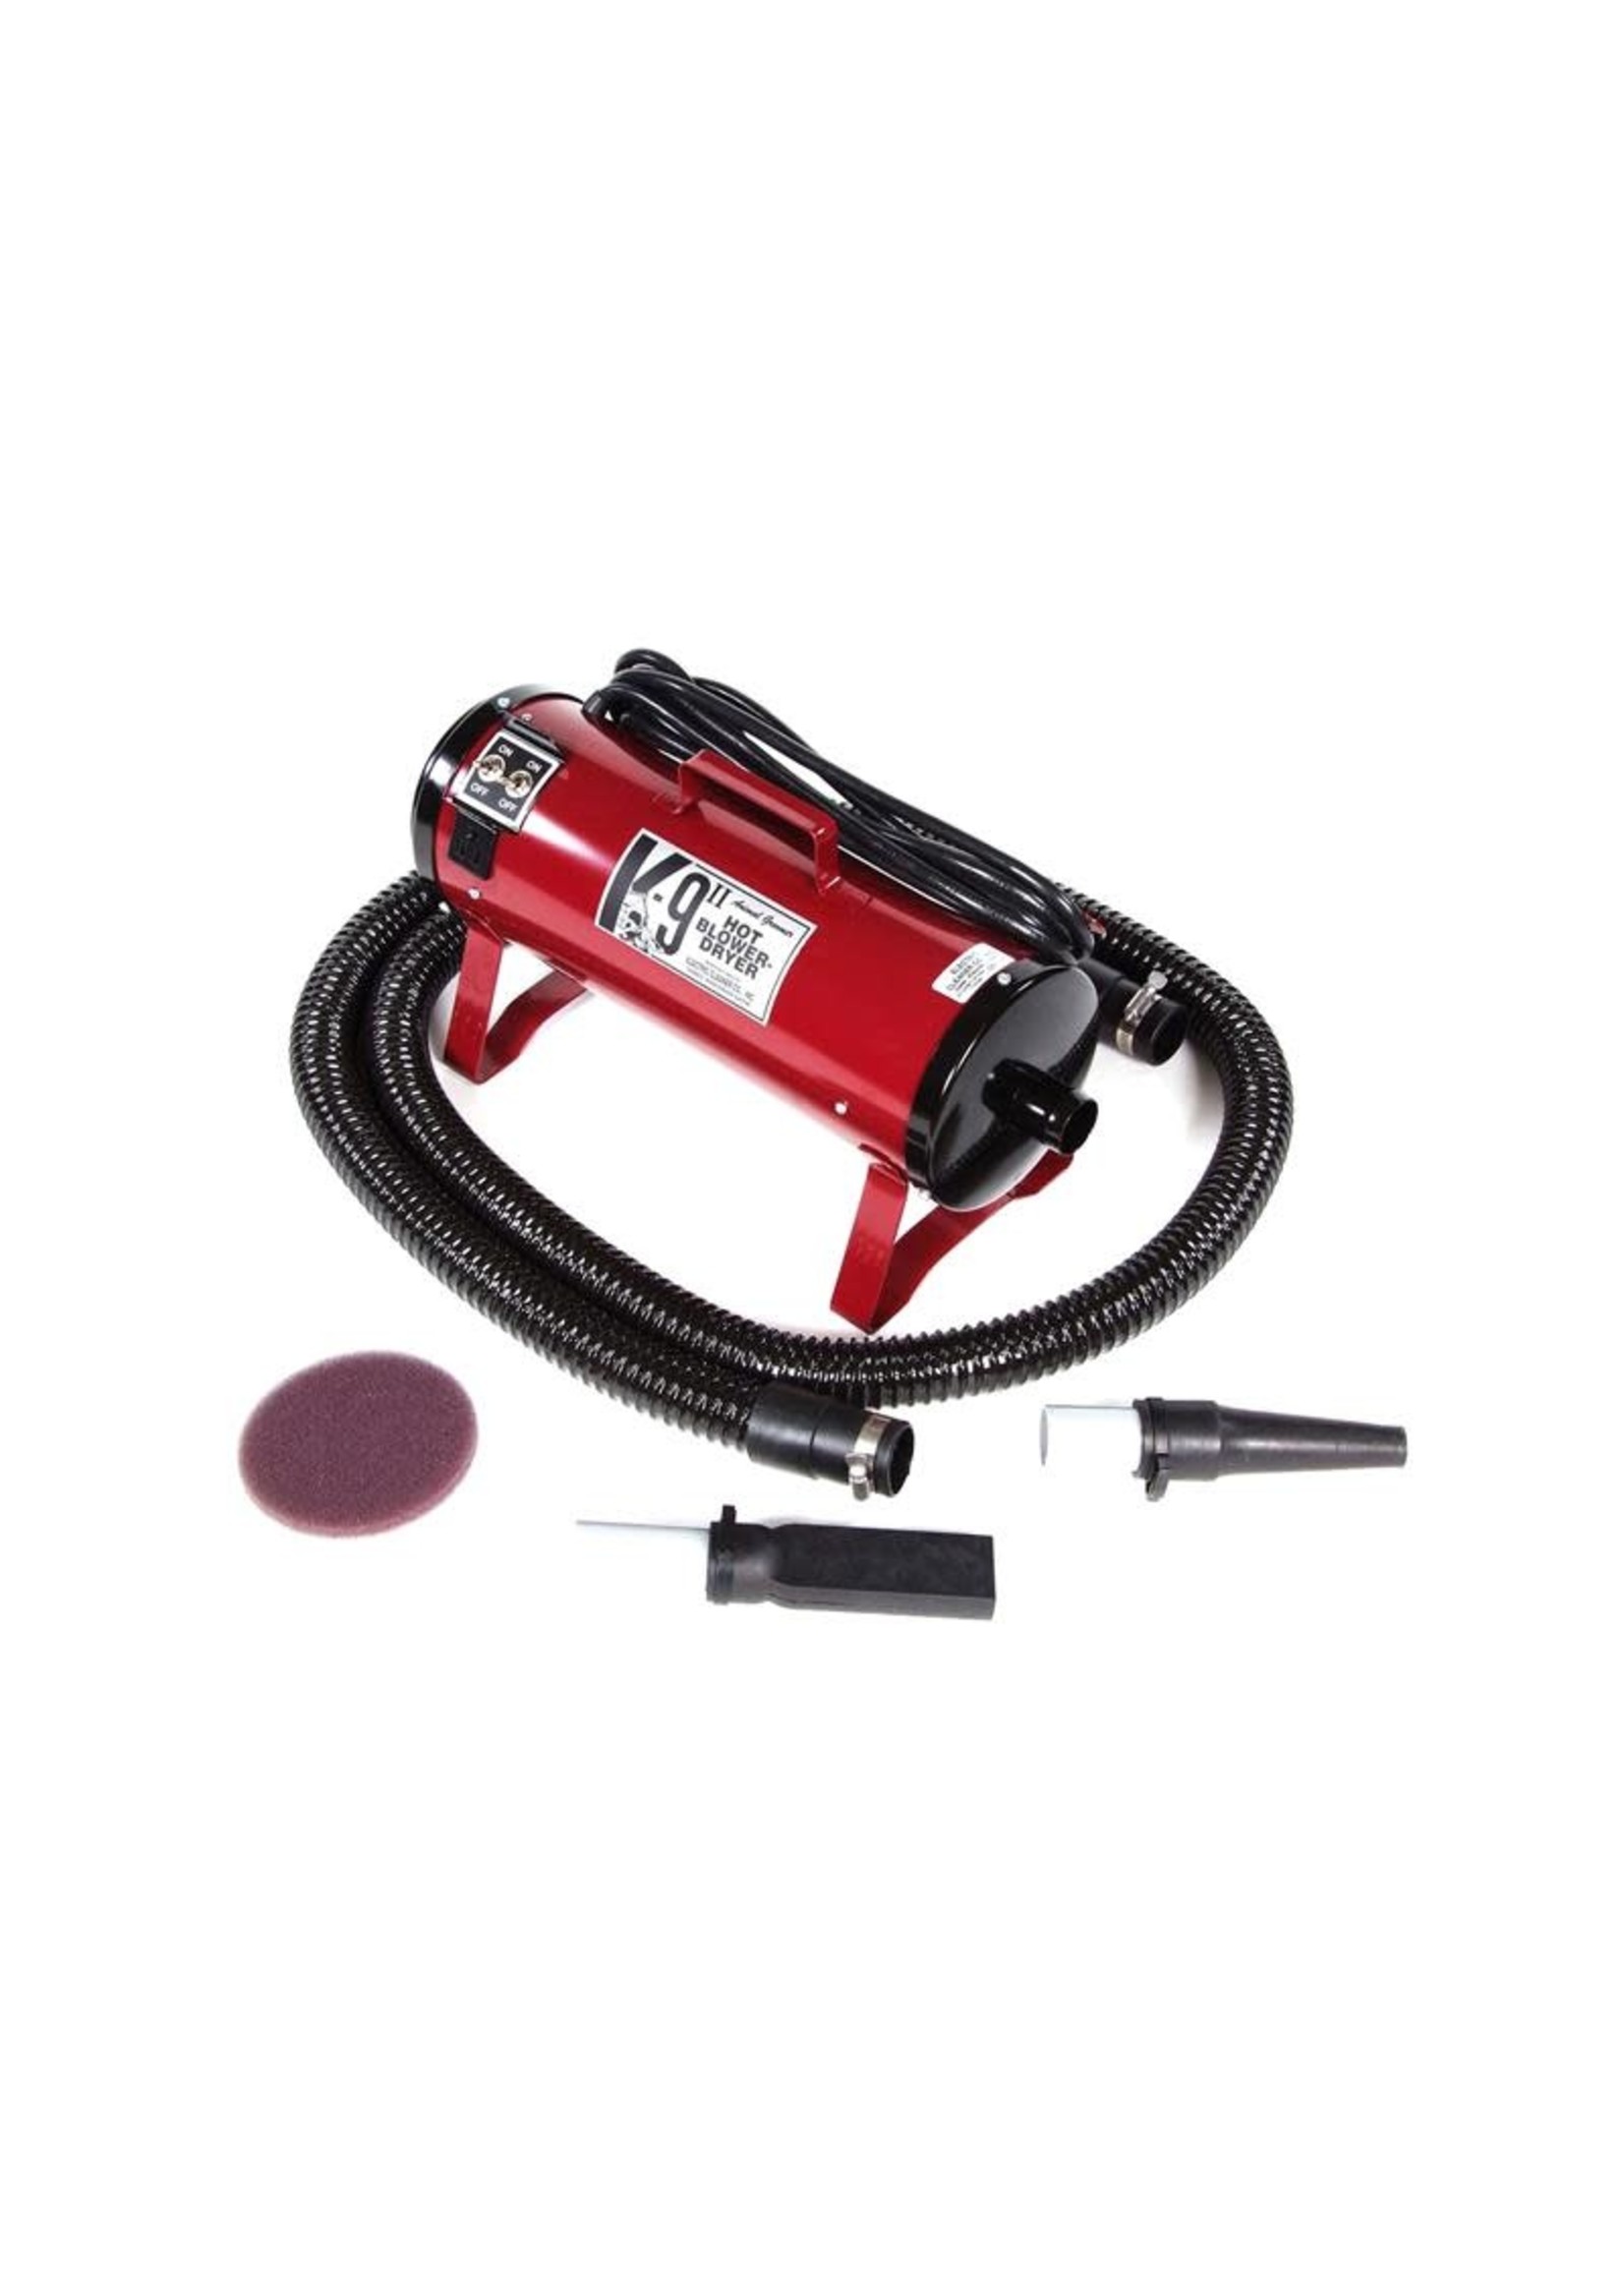 Electric Cleaner Electric Cleaner K-9II Dryer 2-speed